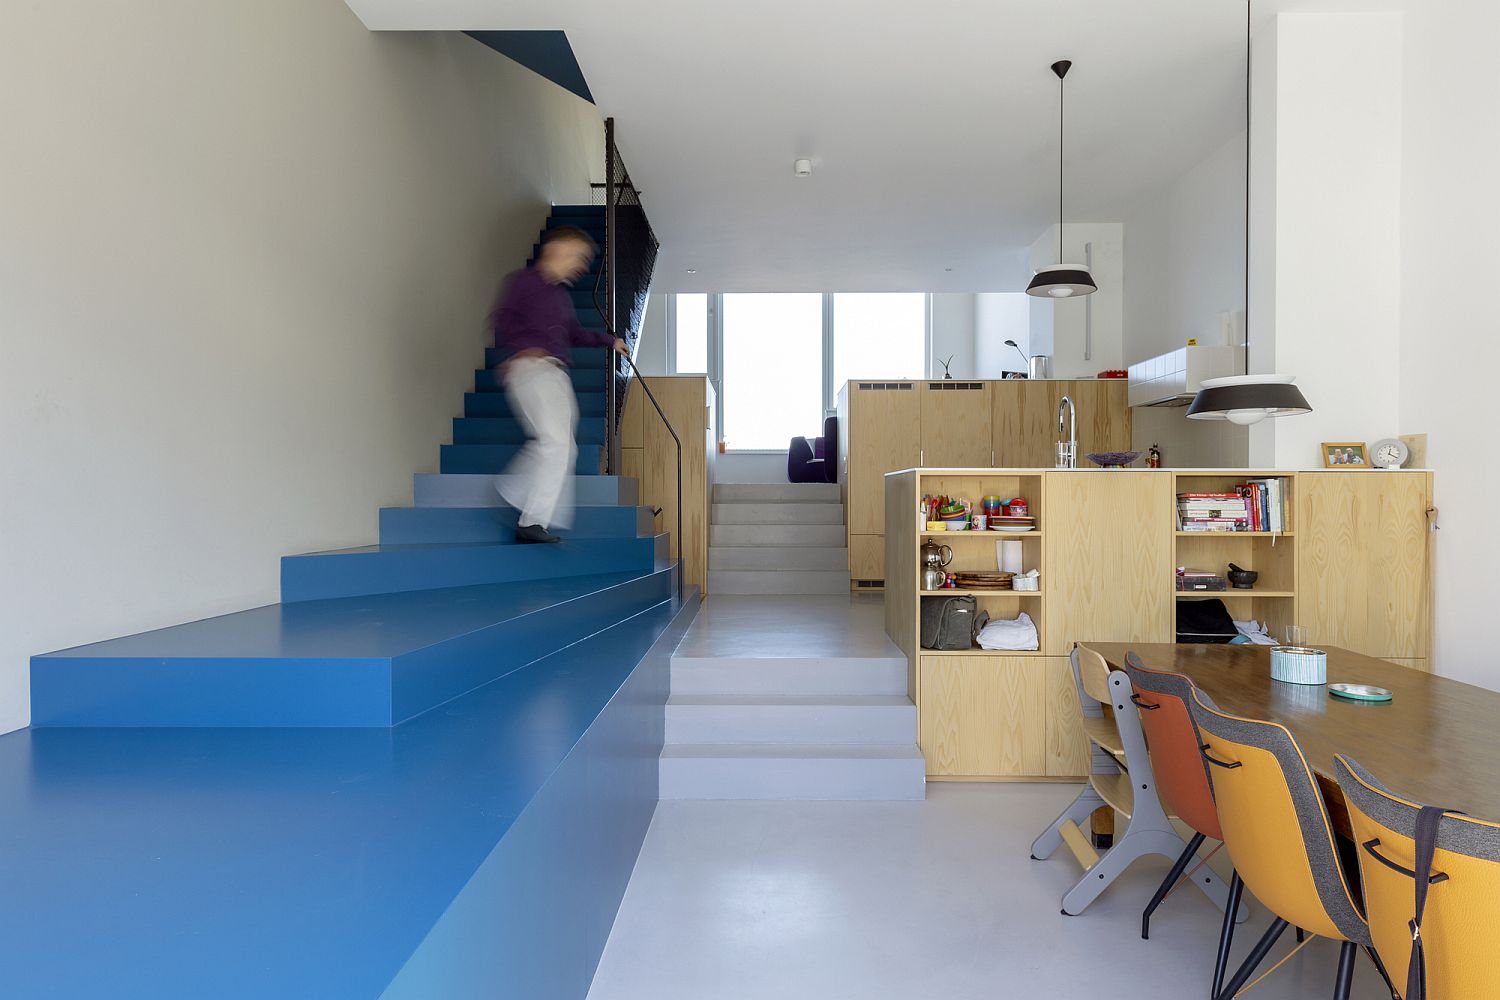 Blue takes over the interior as well with a striking staircase